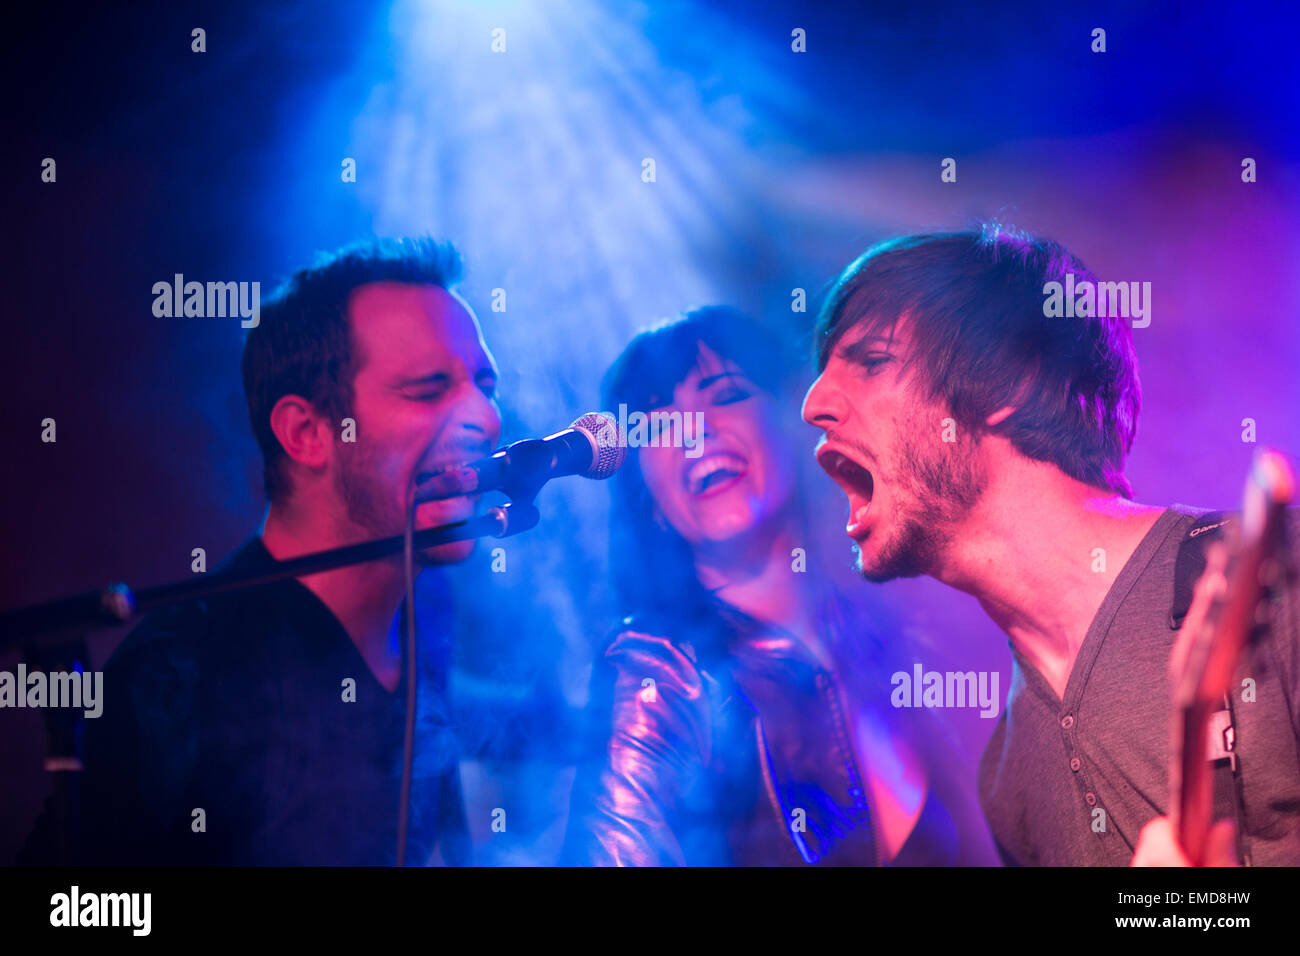 Rock band on stage screaming into microphone Stock Photo